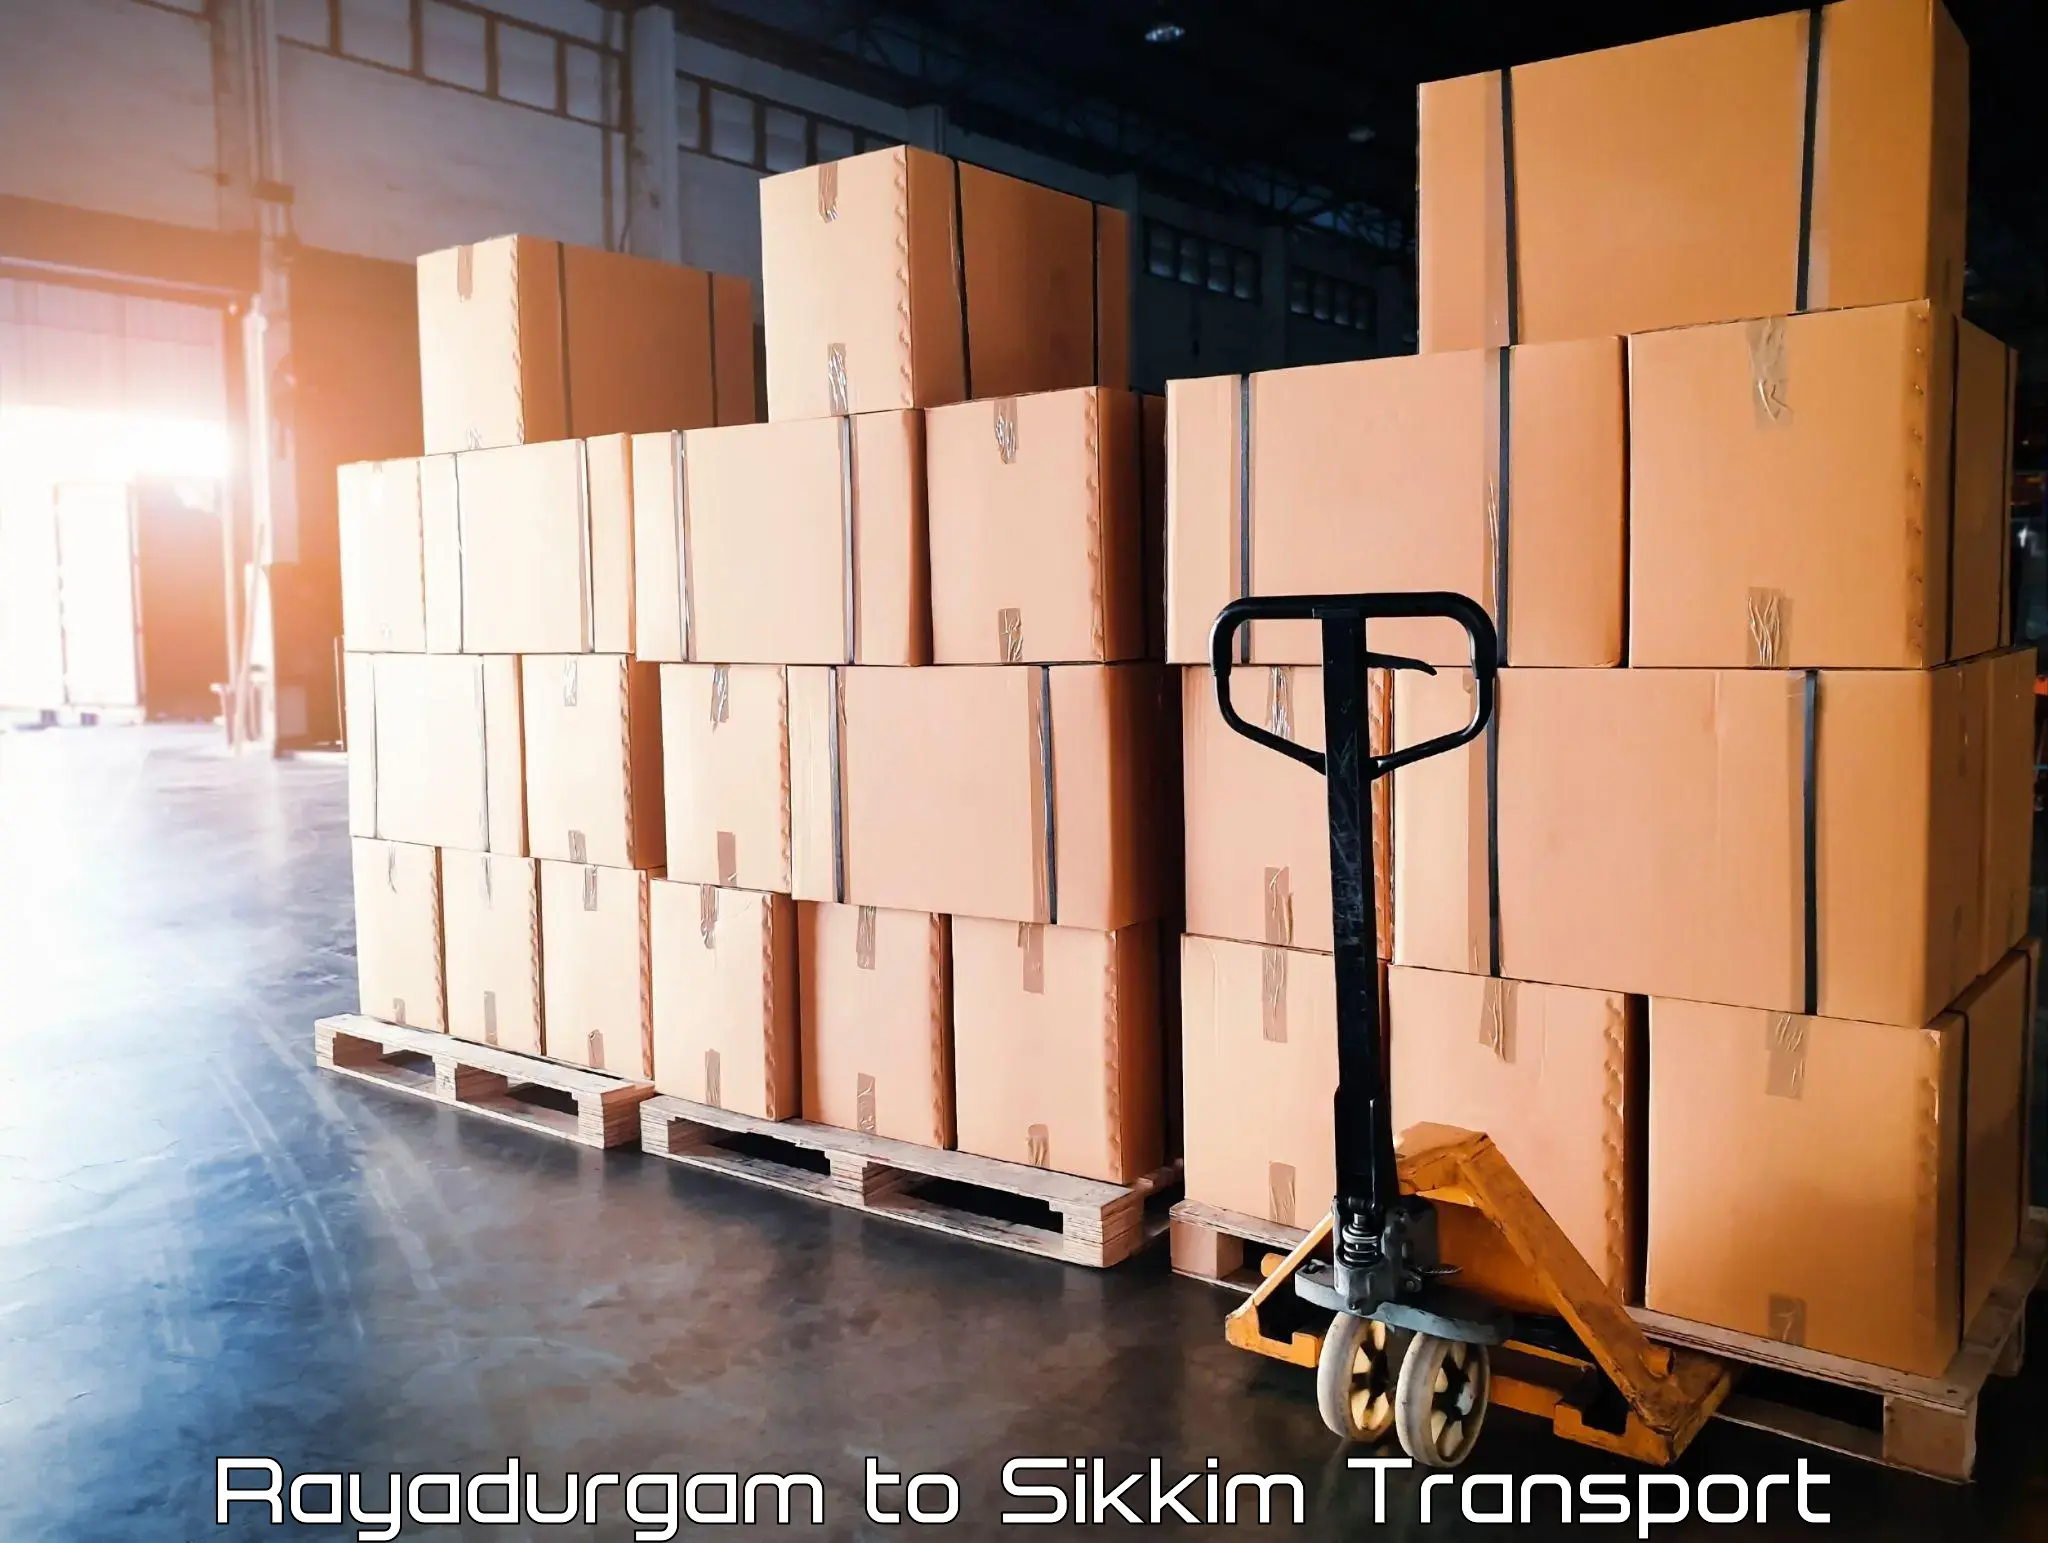 Transport shared services in Rayadurgam to South Sikkim